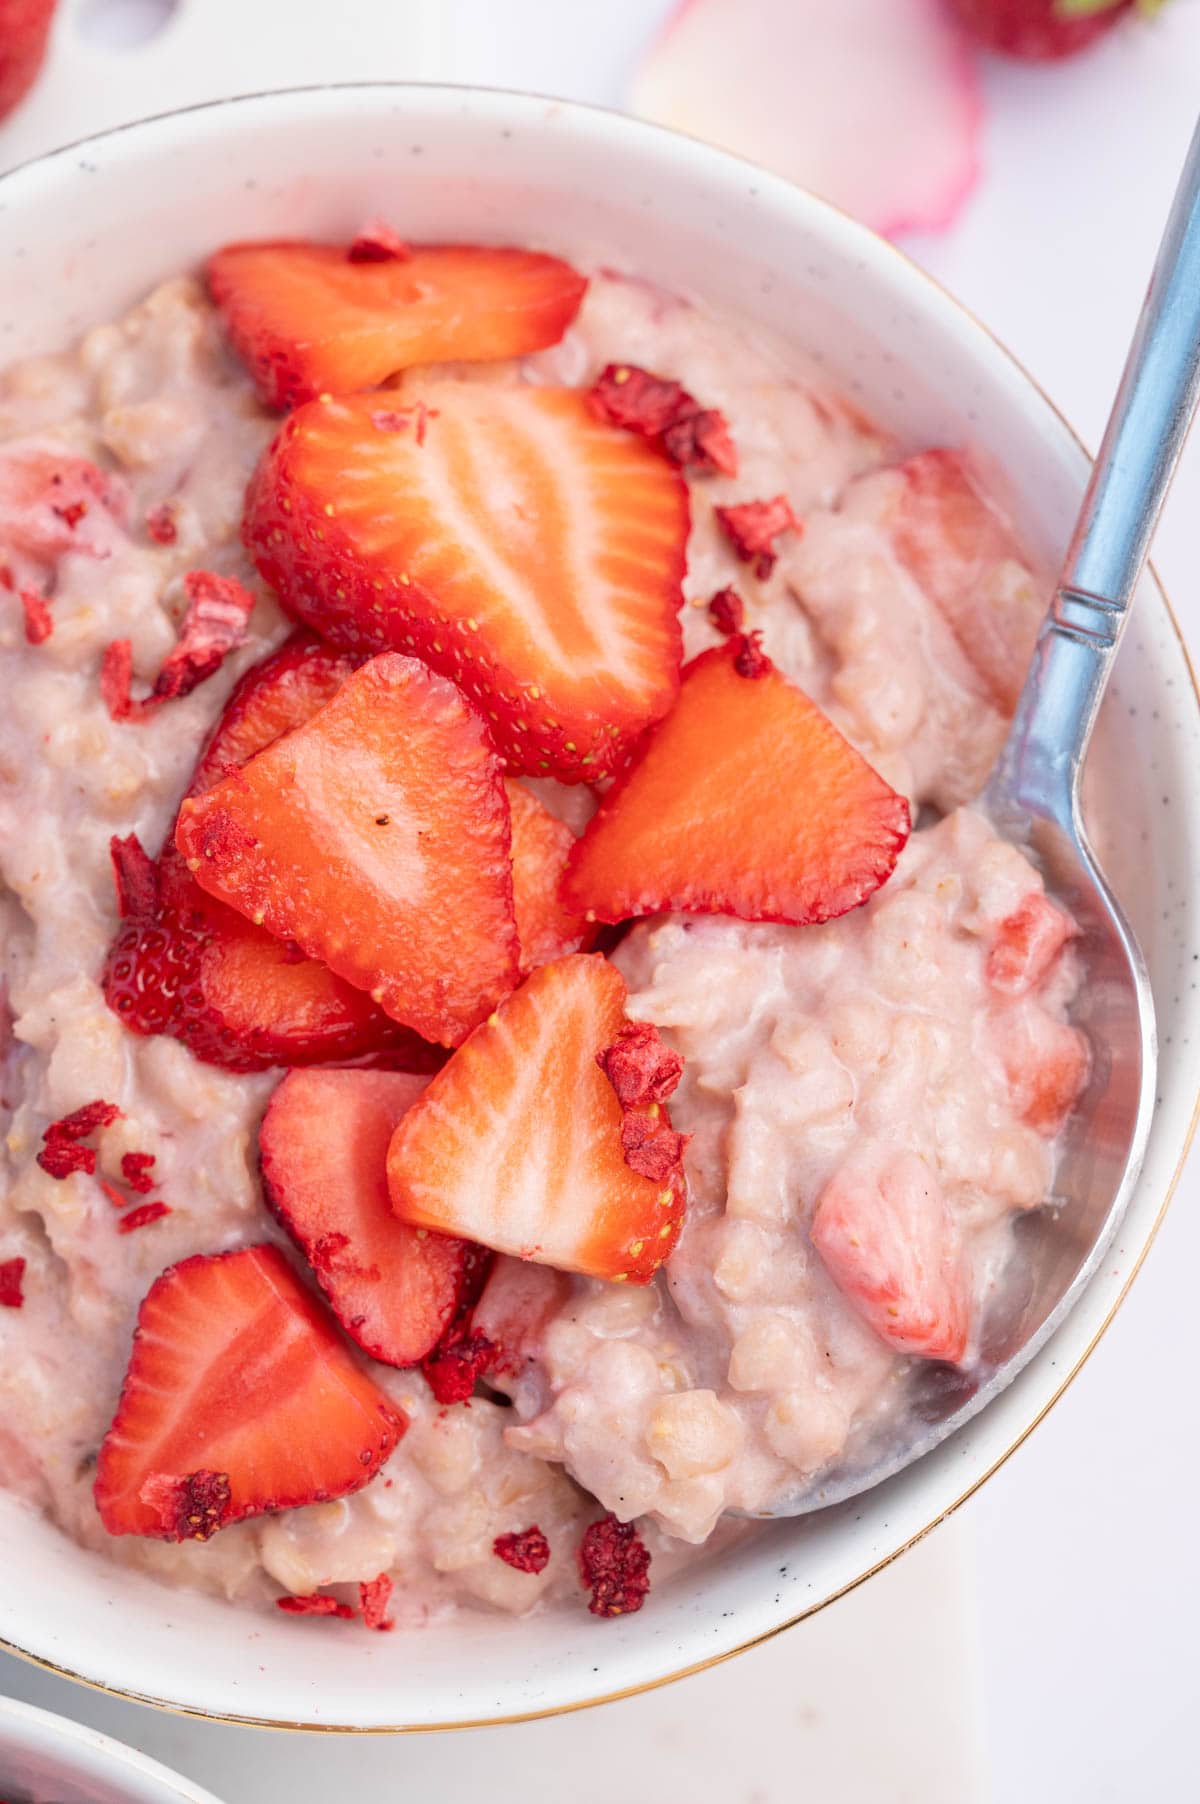 A close-up photo of strawberries and cream oatmeal in a white bowl topped with slices strawberries with a spoon on the side.